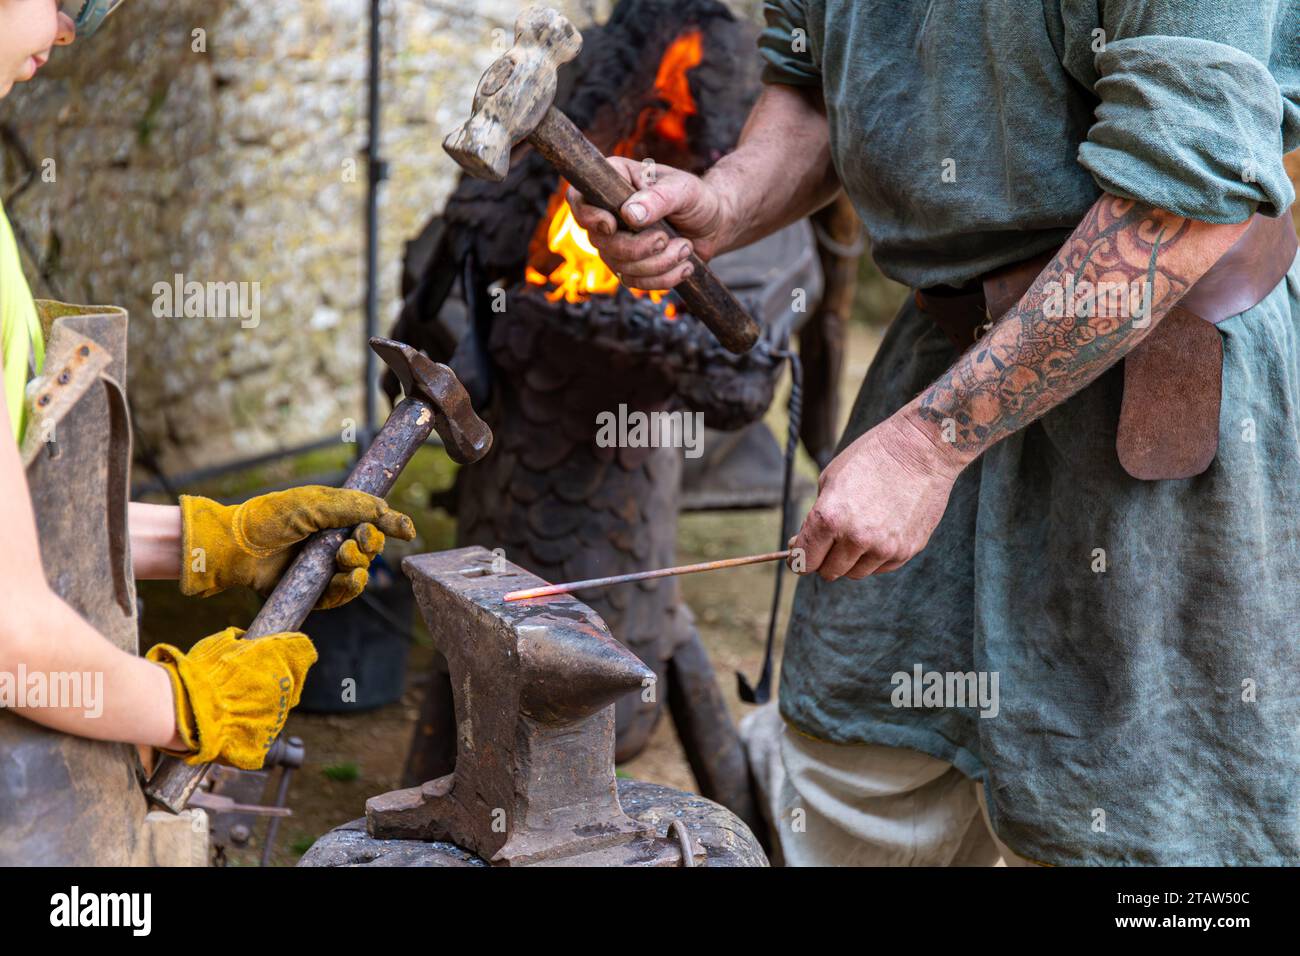 Demonstration of blacksmithing in a dragon head shaped forge during medieval festival in Bonaguil castle, France Stock Photo